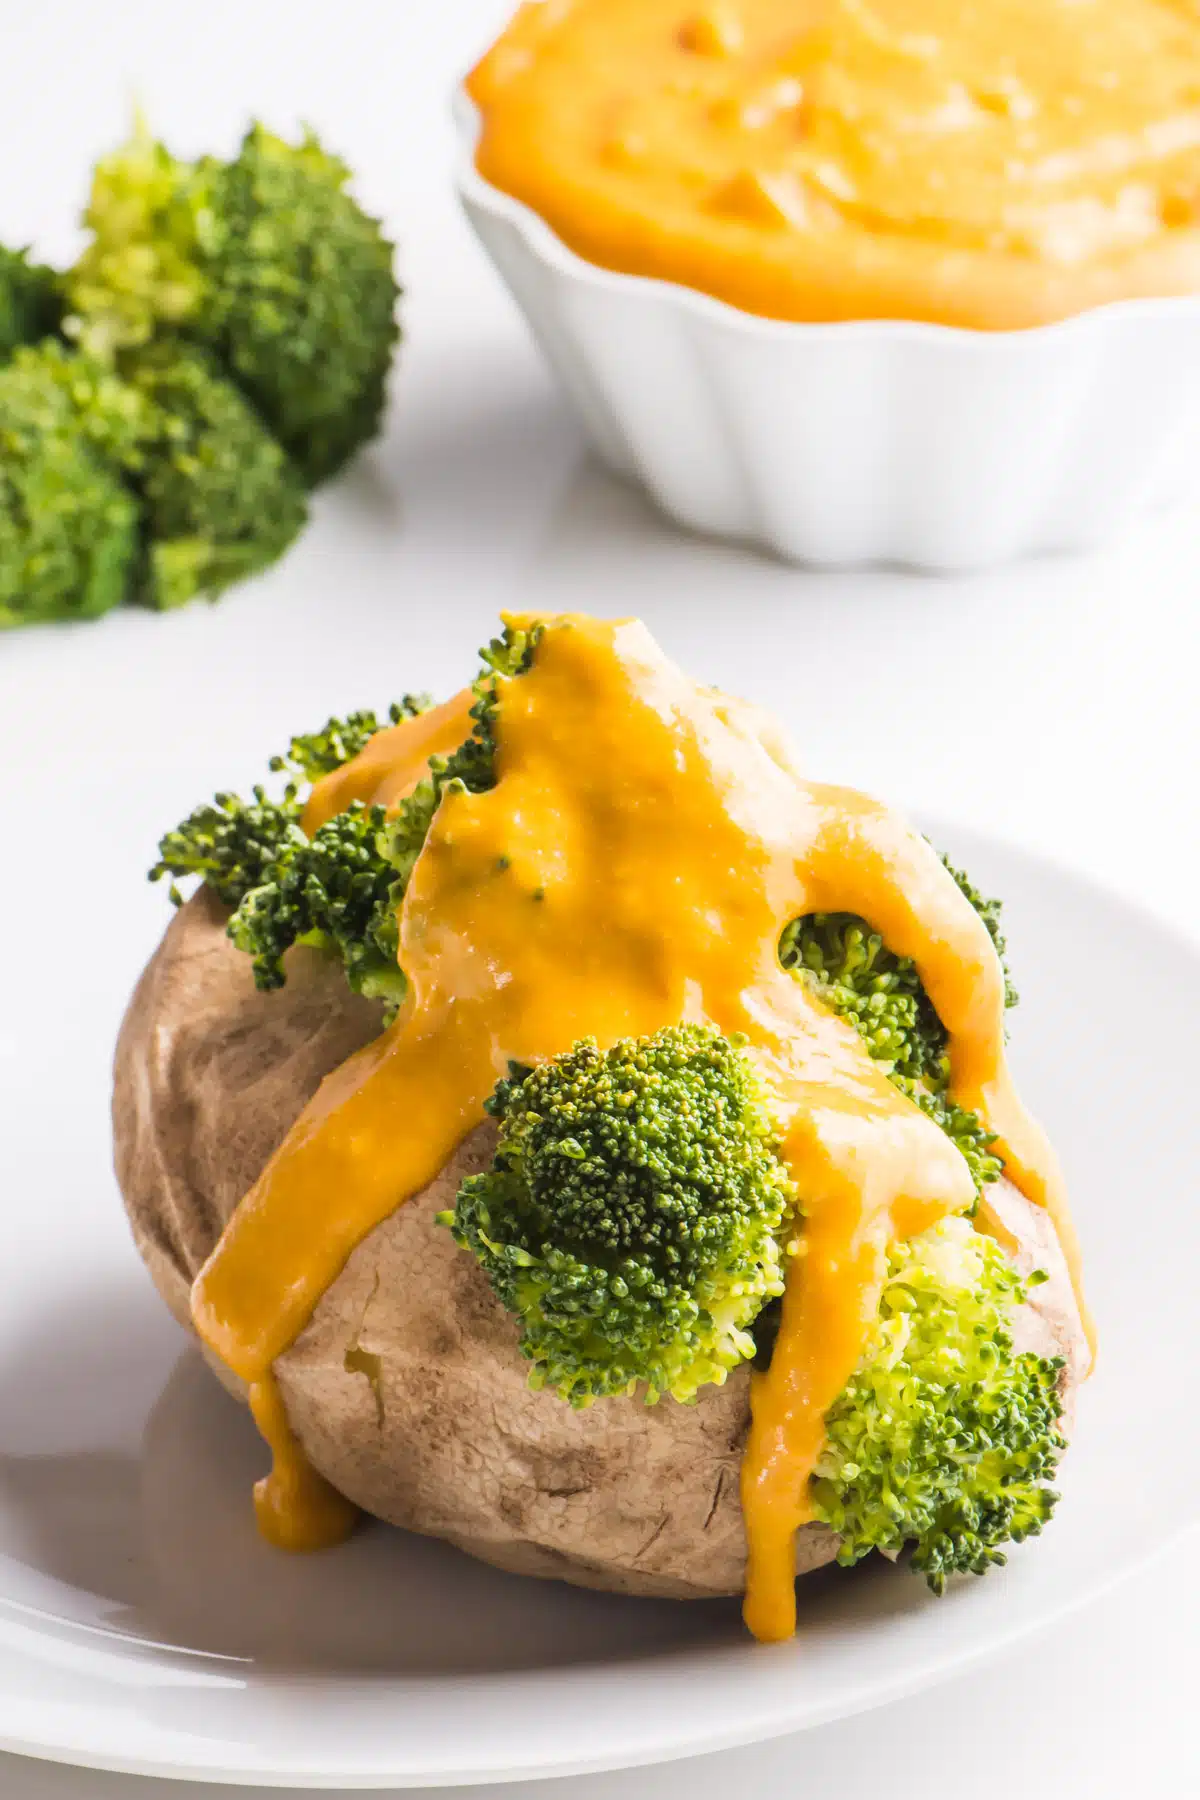 A baked potato is topped with steamed broccoli and vegan cheese sauce.